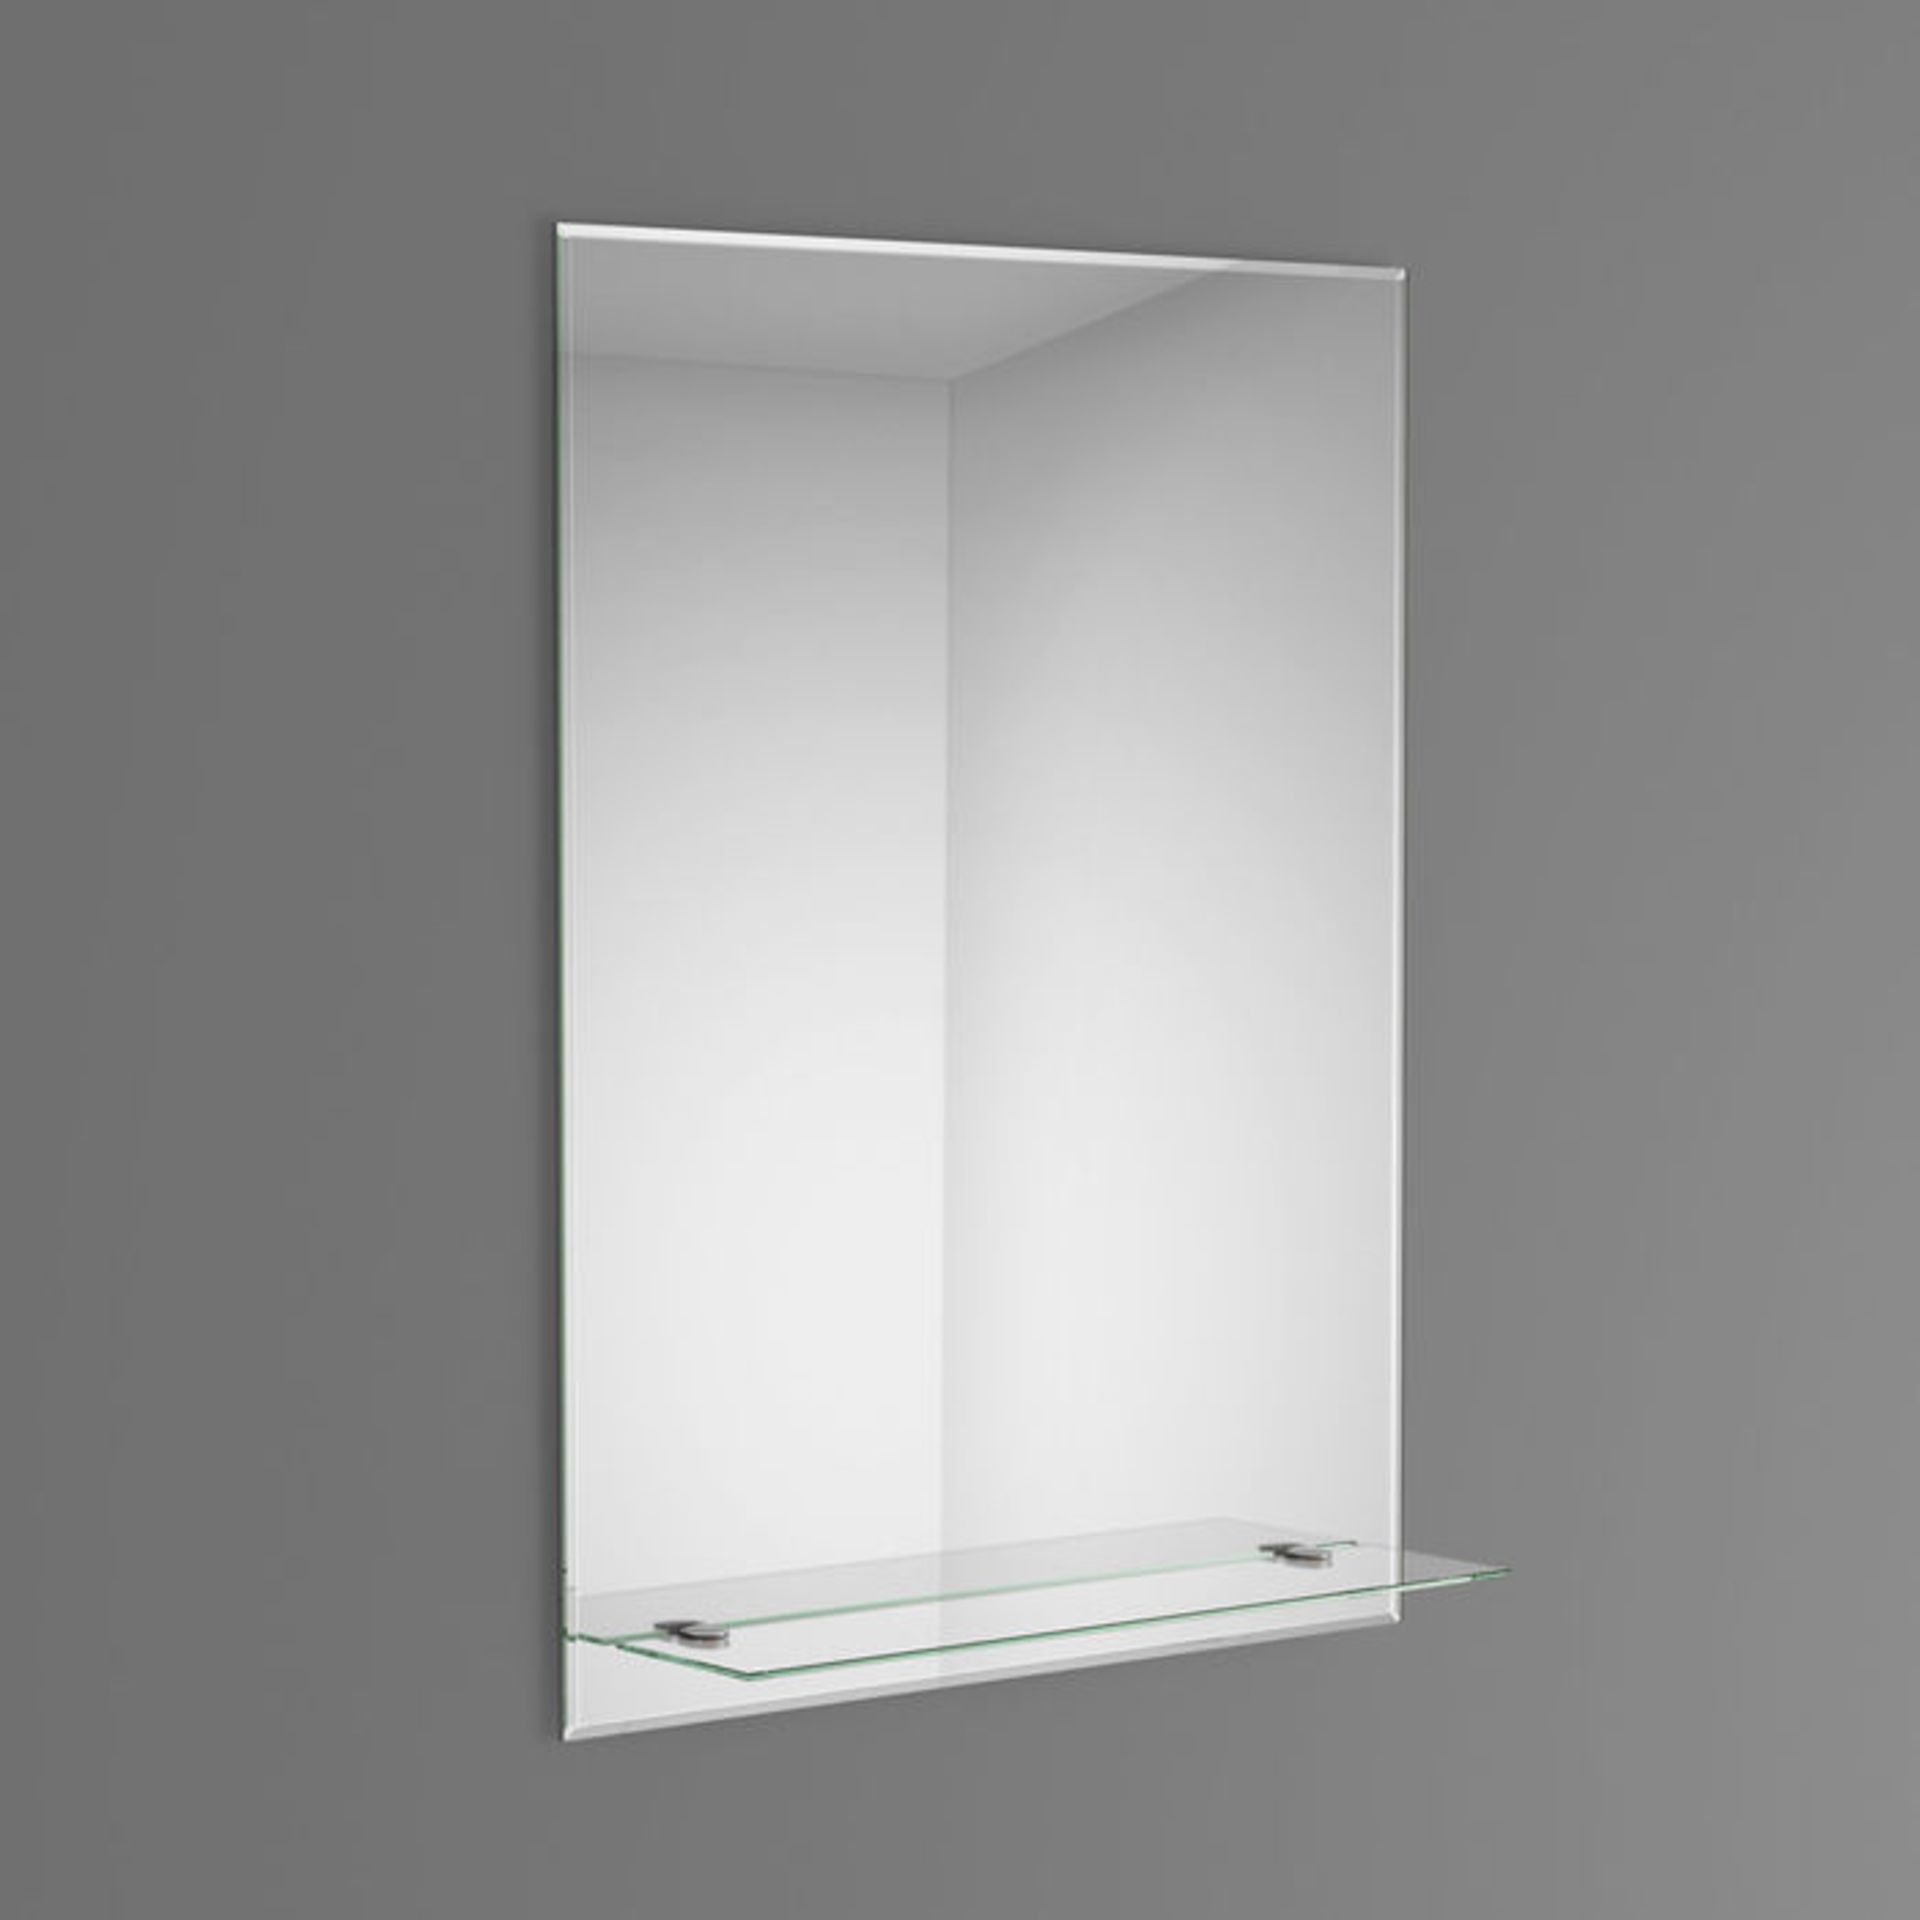 (SA218) 800x600mm Jesmond Mirror & Shelf. We love this because you can use it to store all of your - Image 3 of 3